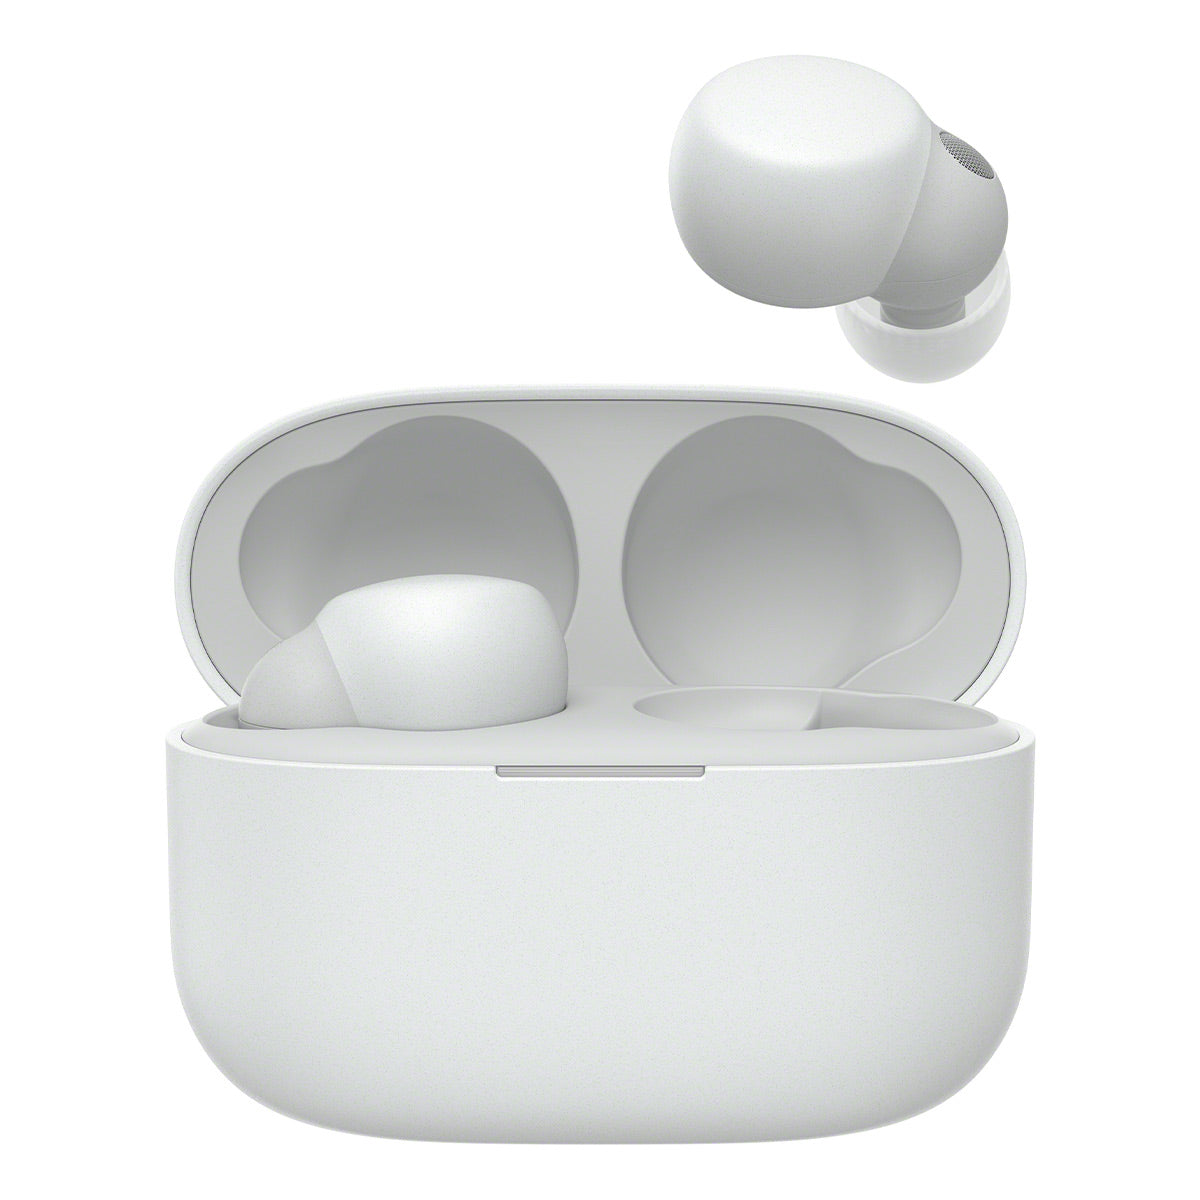 Sony LinkBuds S Truly Wireless Noise Canceling Earbuds (White)